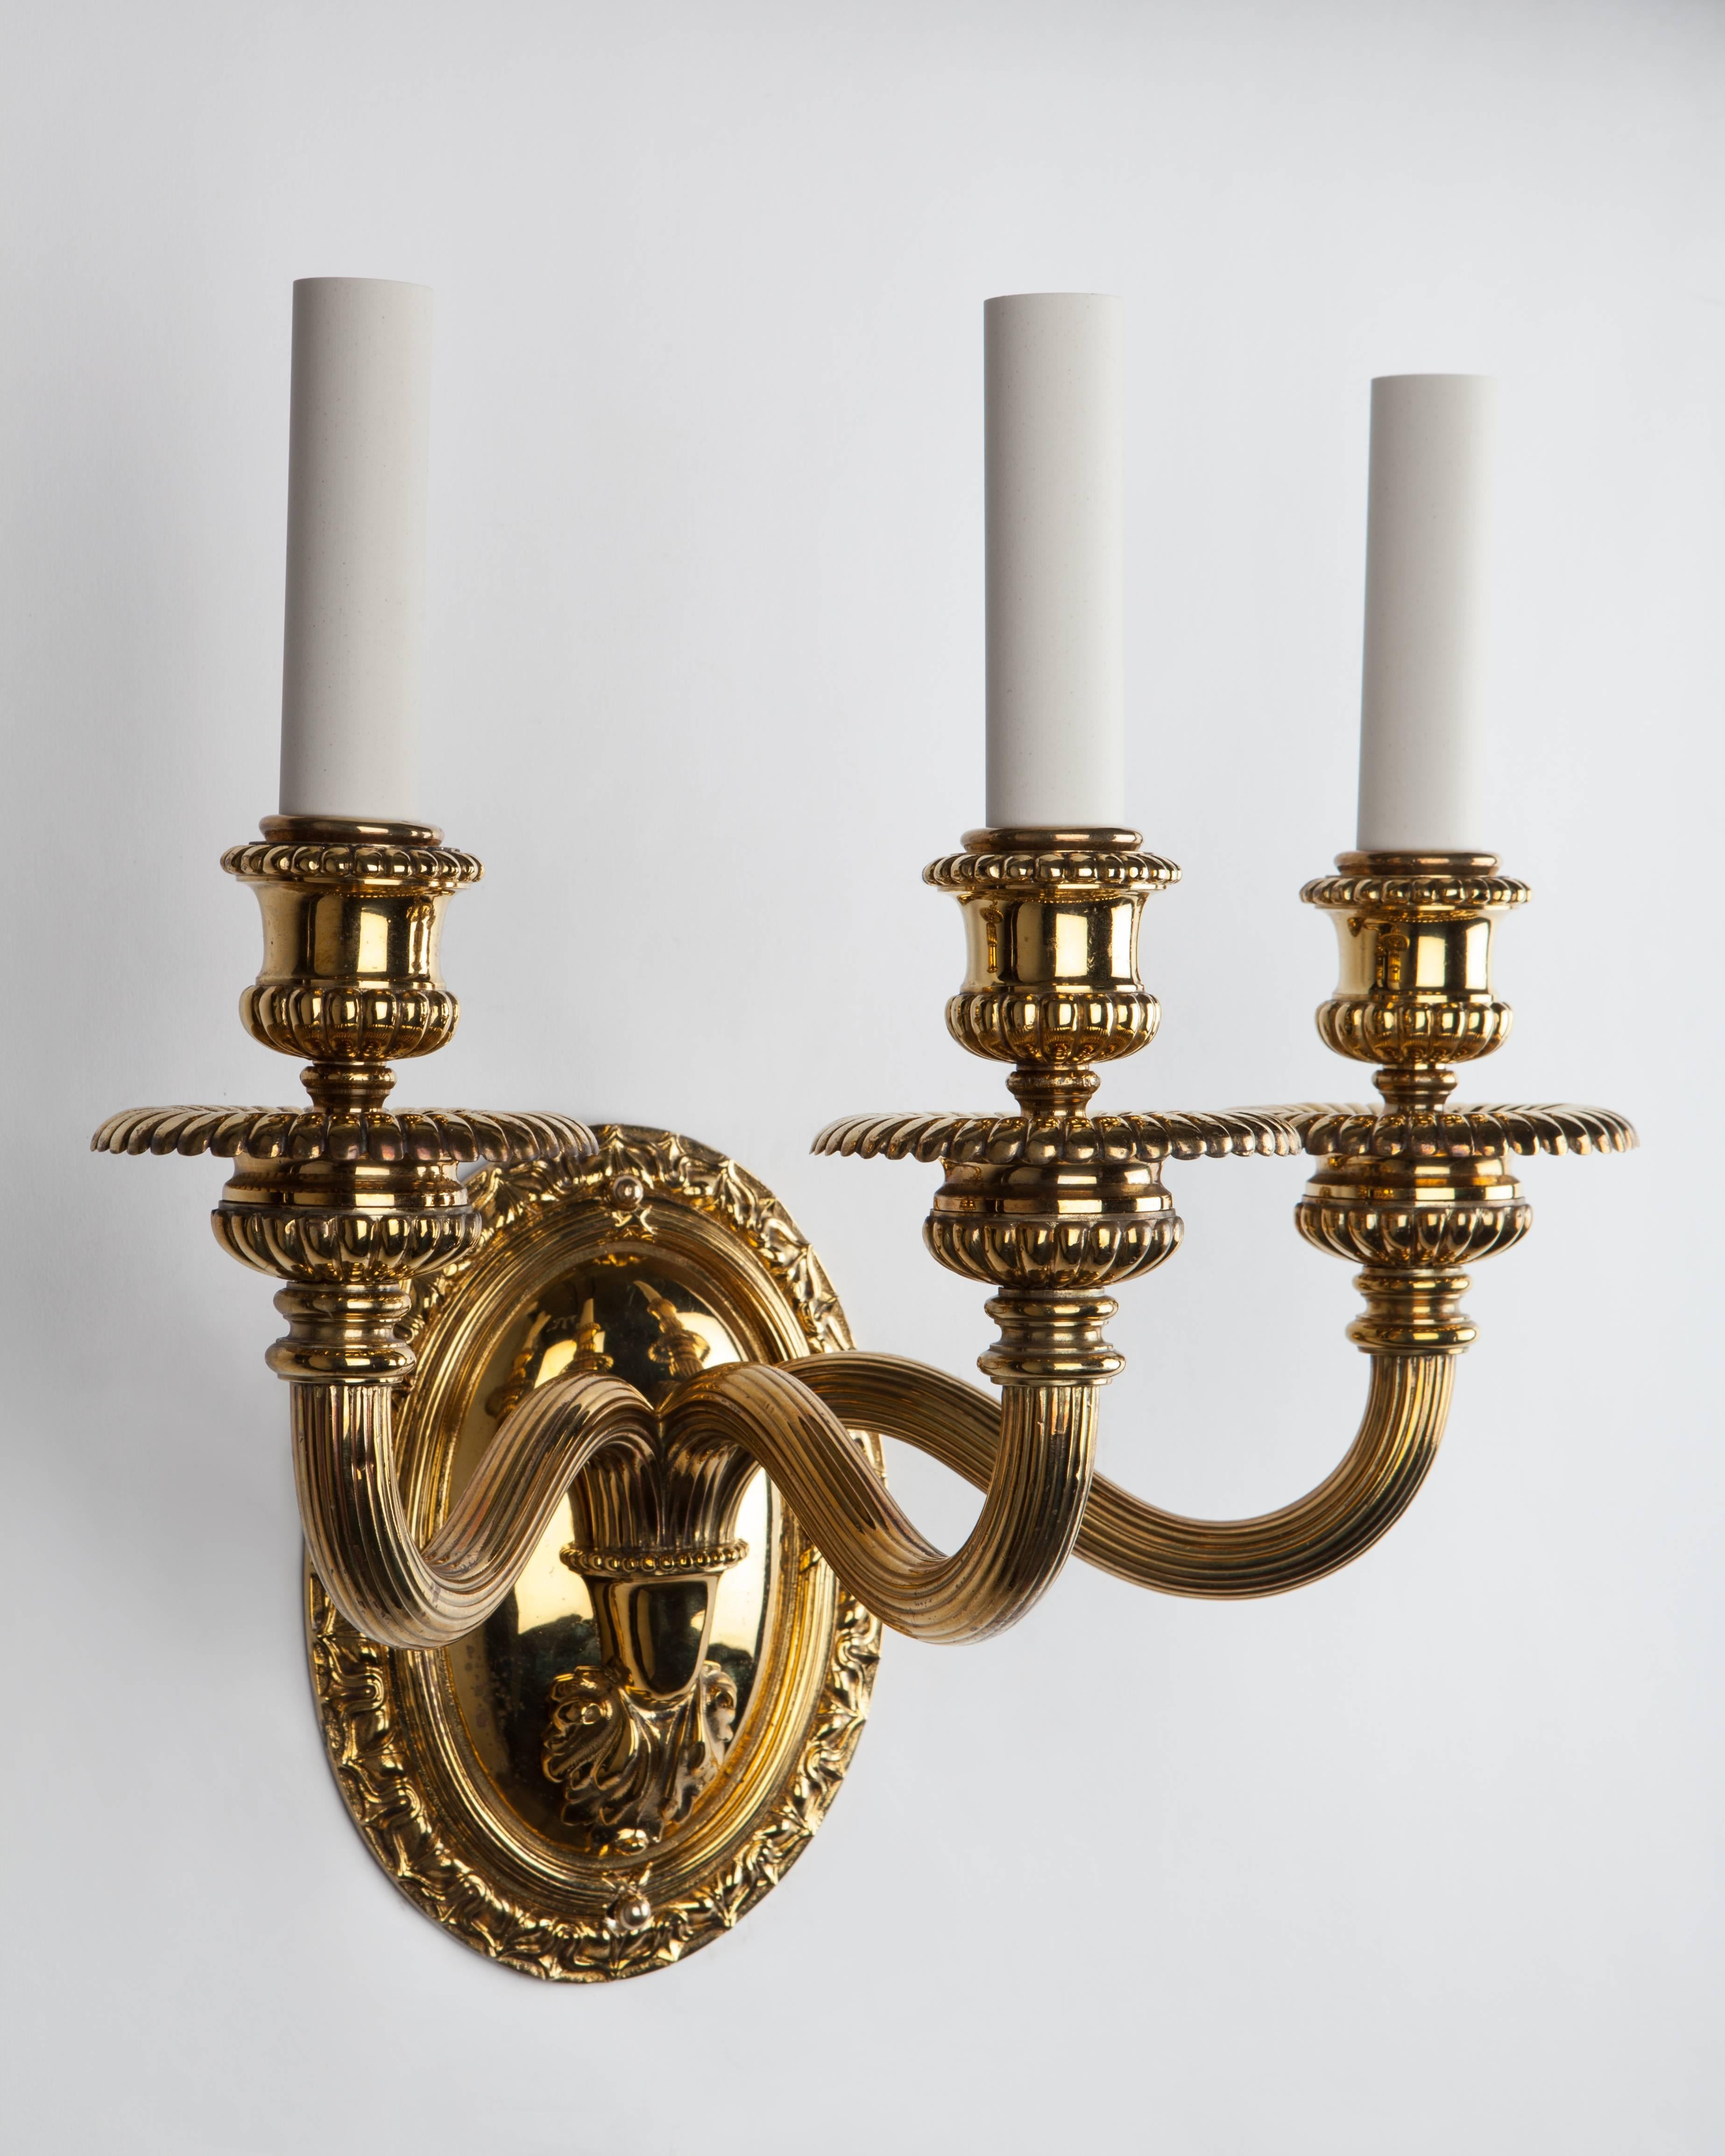 AIS2946
A pair of three arm sconces with large, oval leaf-and-dart bordered backplates and stout reeded arms supporting gadrooned waxpans and candle cups. All in their original aged lacquered brass finish. Signed by the New York maker E. F.